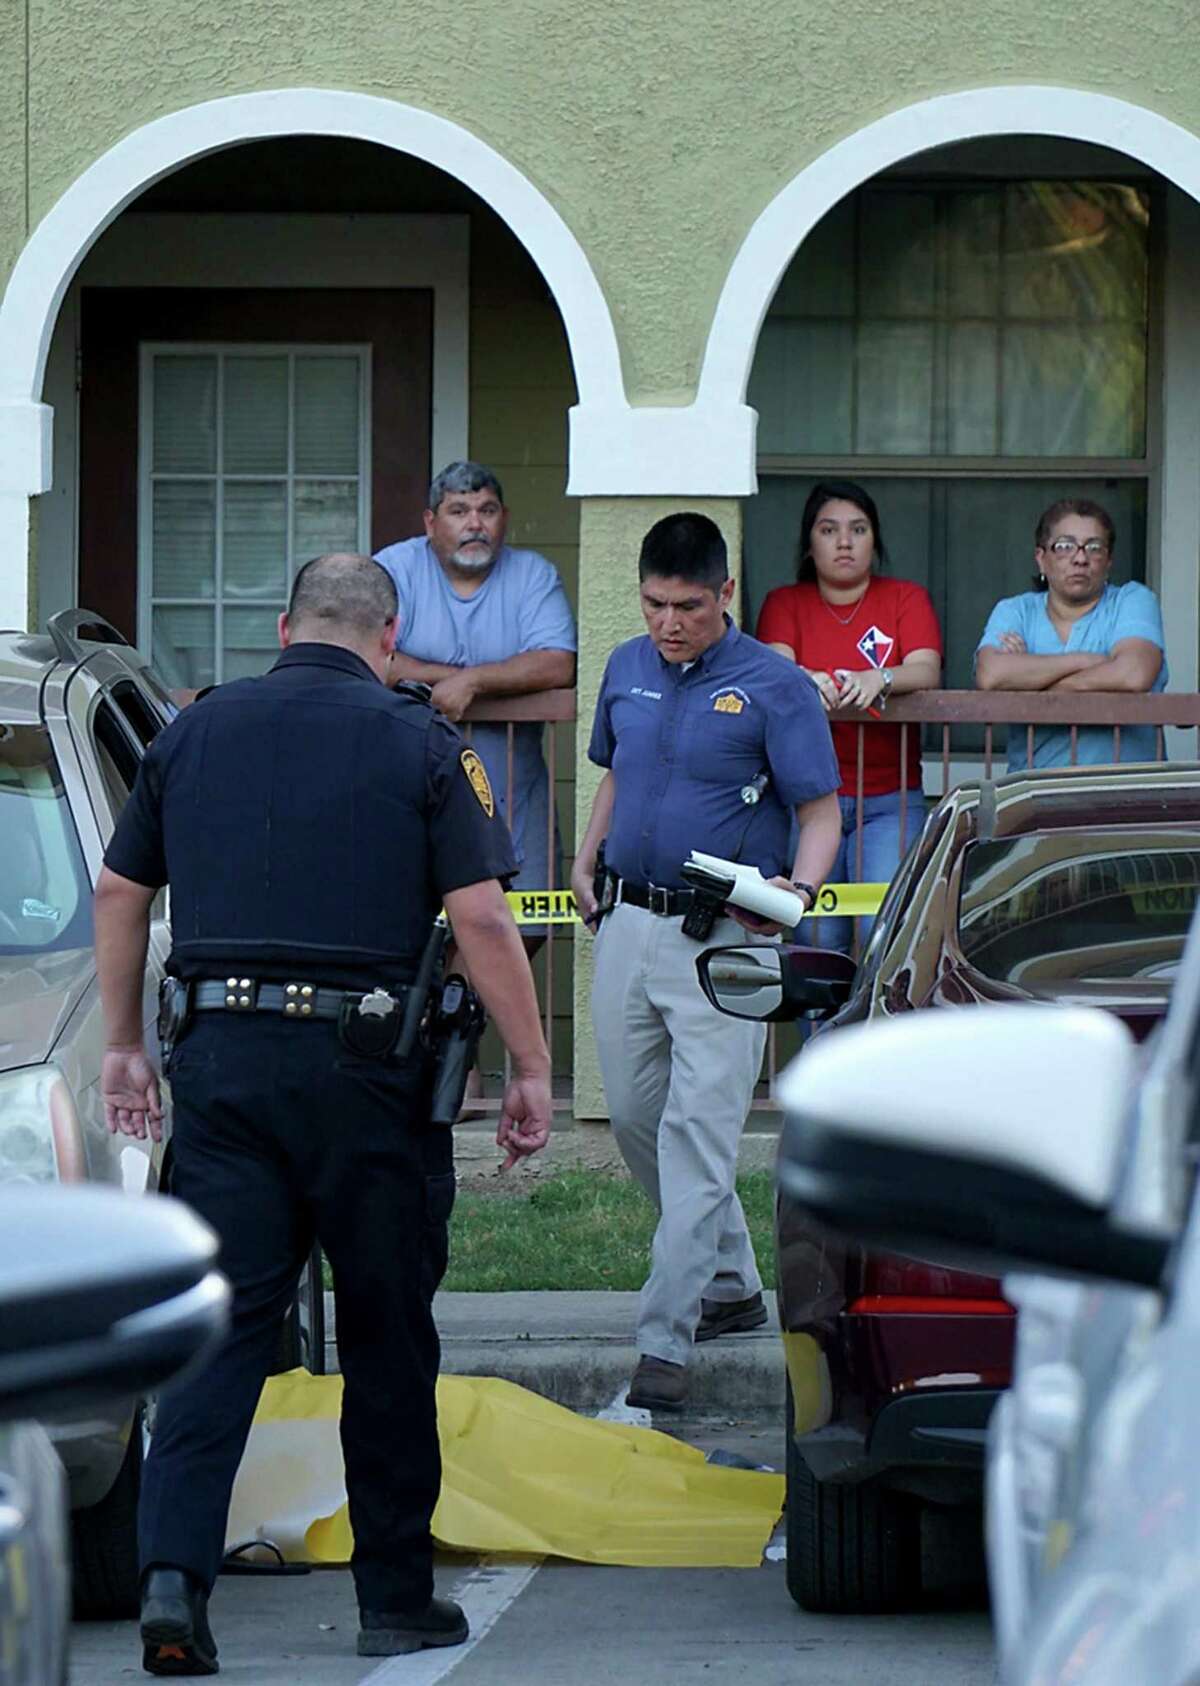 A woman was killed Tuesday afternoon in a South Side apartment complex and a second woman is in critical condition. San Antonio Police Department Sgt. Roy Miller said the two women were shot at about 7 p.m. in the parking lot of the Rosemont at University Park apartments, 102 Emerald Ash. The suspect, who police say is a juvenile, fled the scene after the shooting. One woman was pronounced dead at the scene and a second was taken to San Antonio Military Medical Center. Miller said both women appear to be in their 30s.